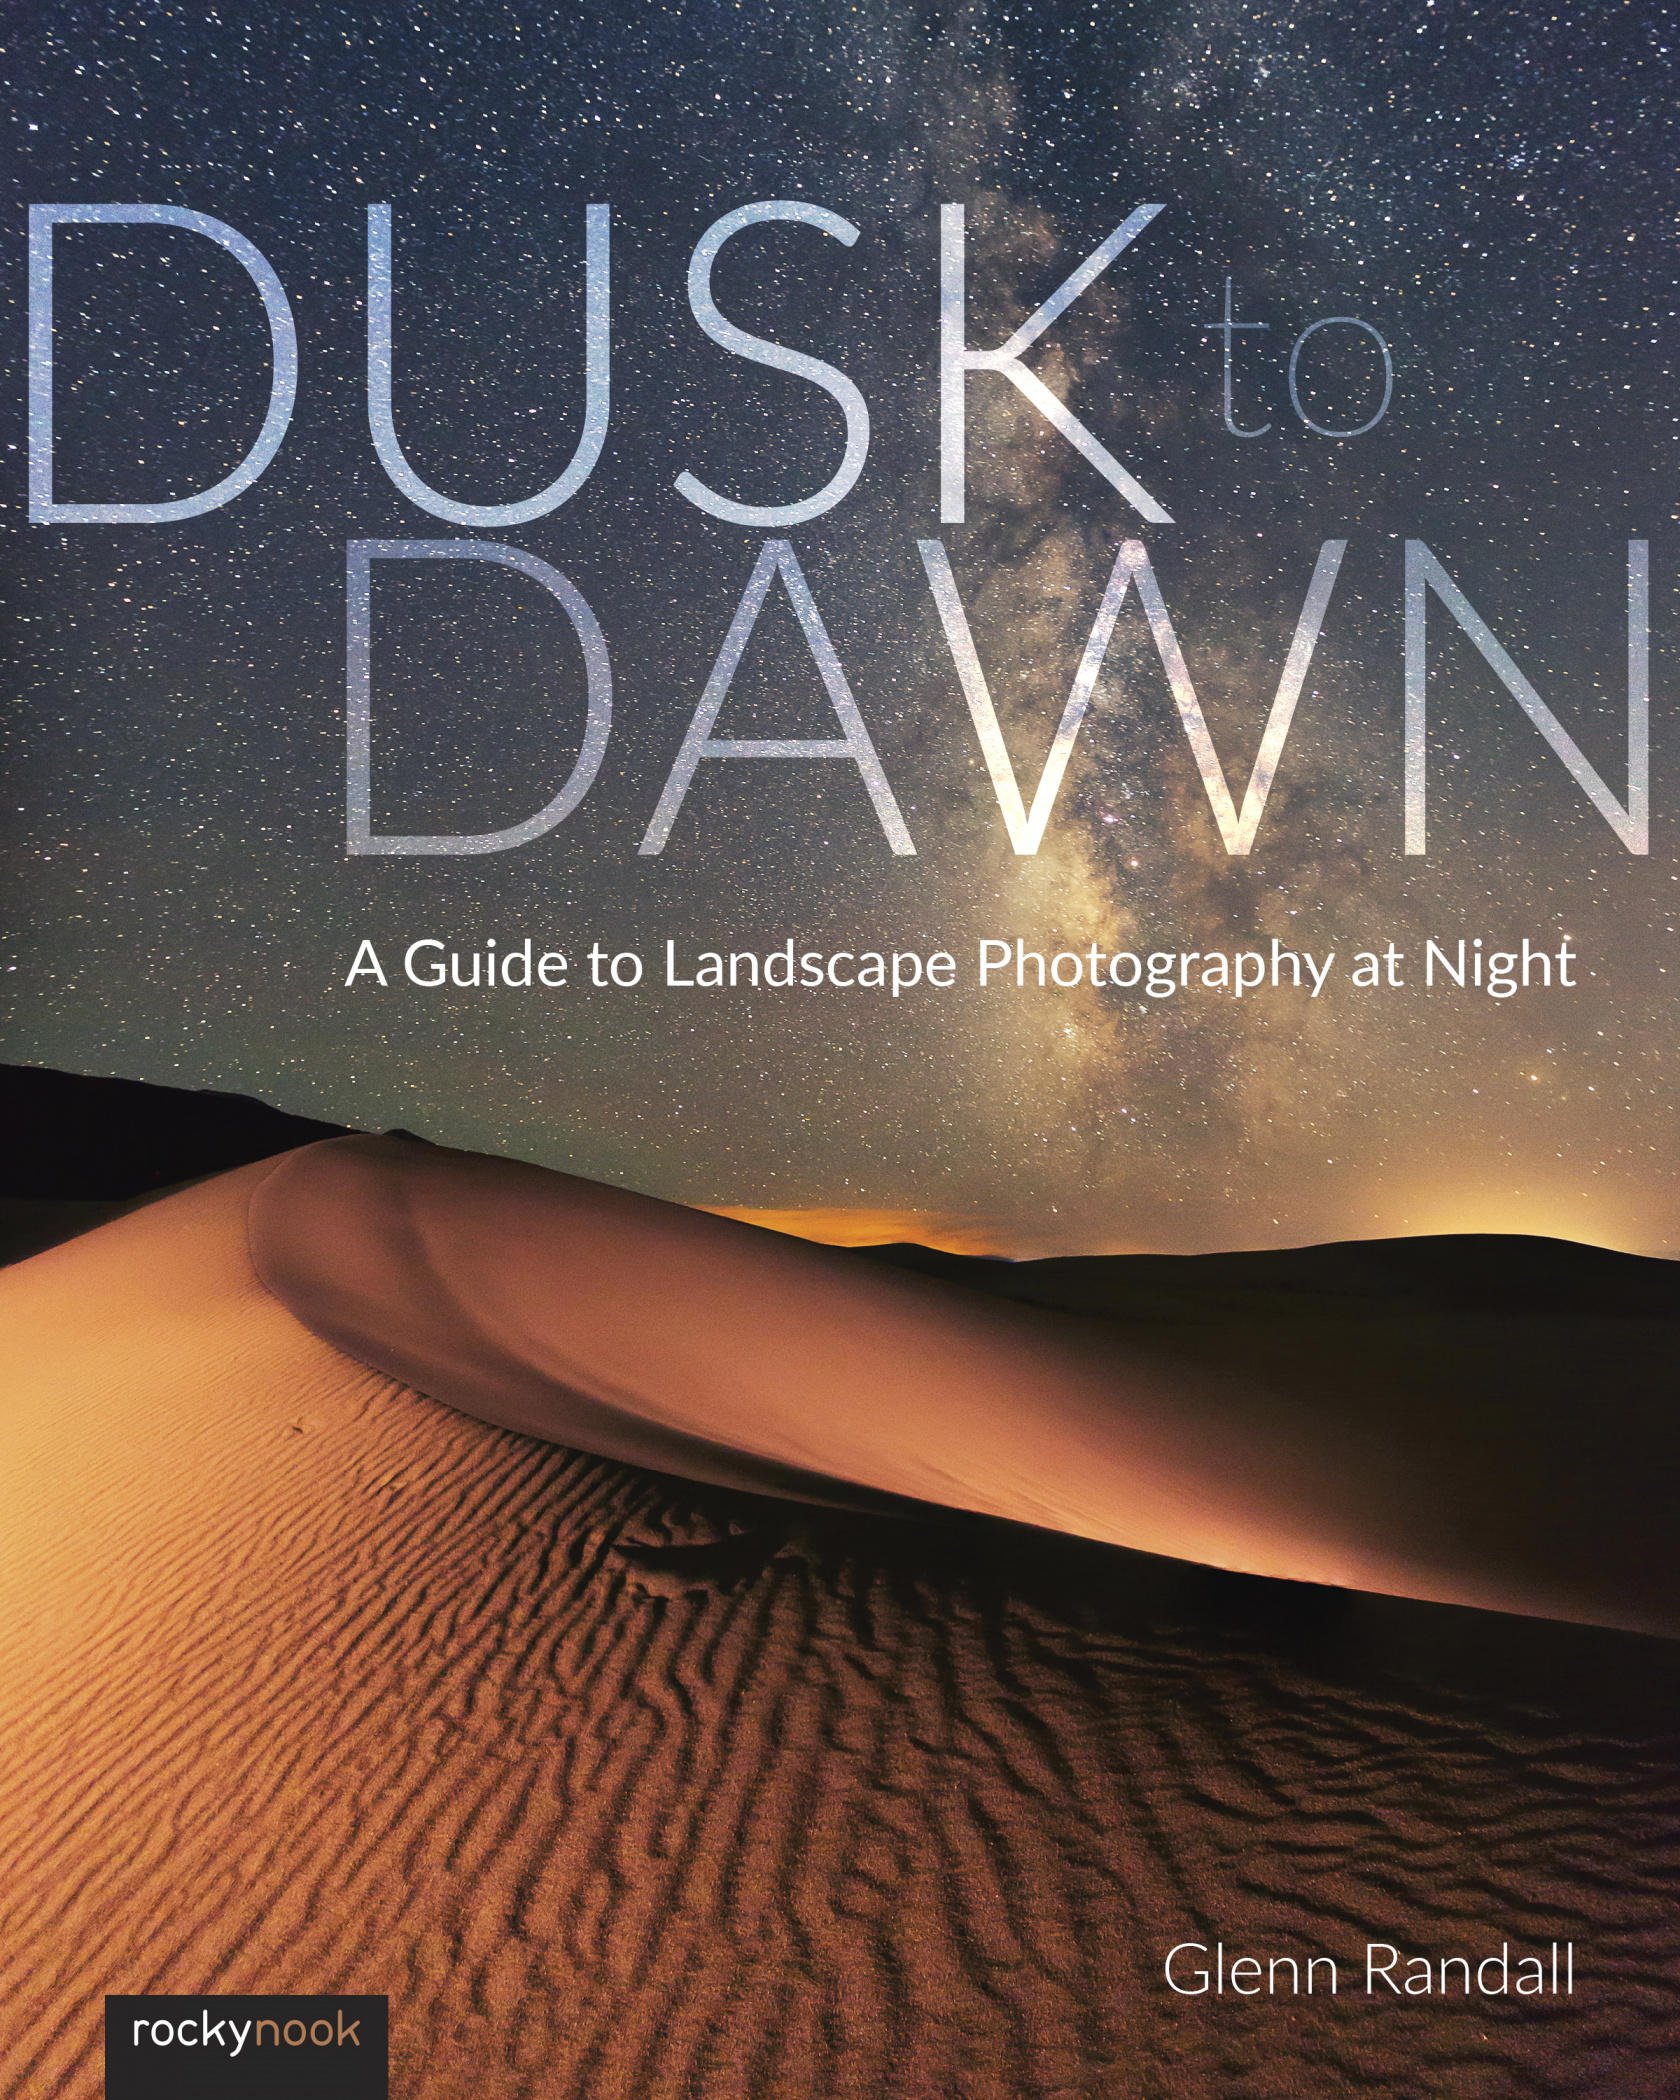 75 Best Photography Books to Master the Art of Painting with Light